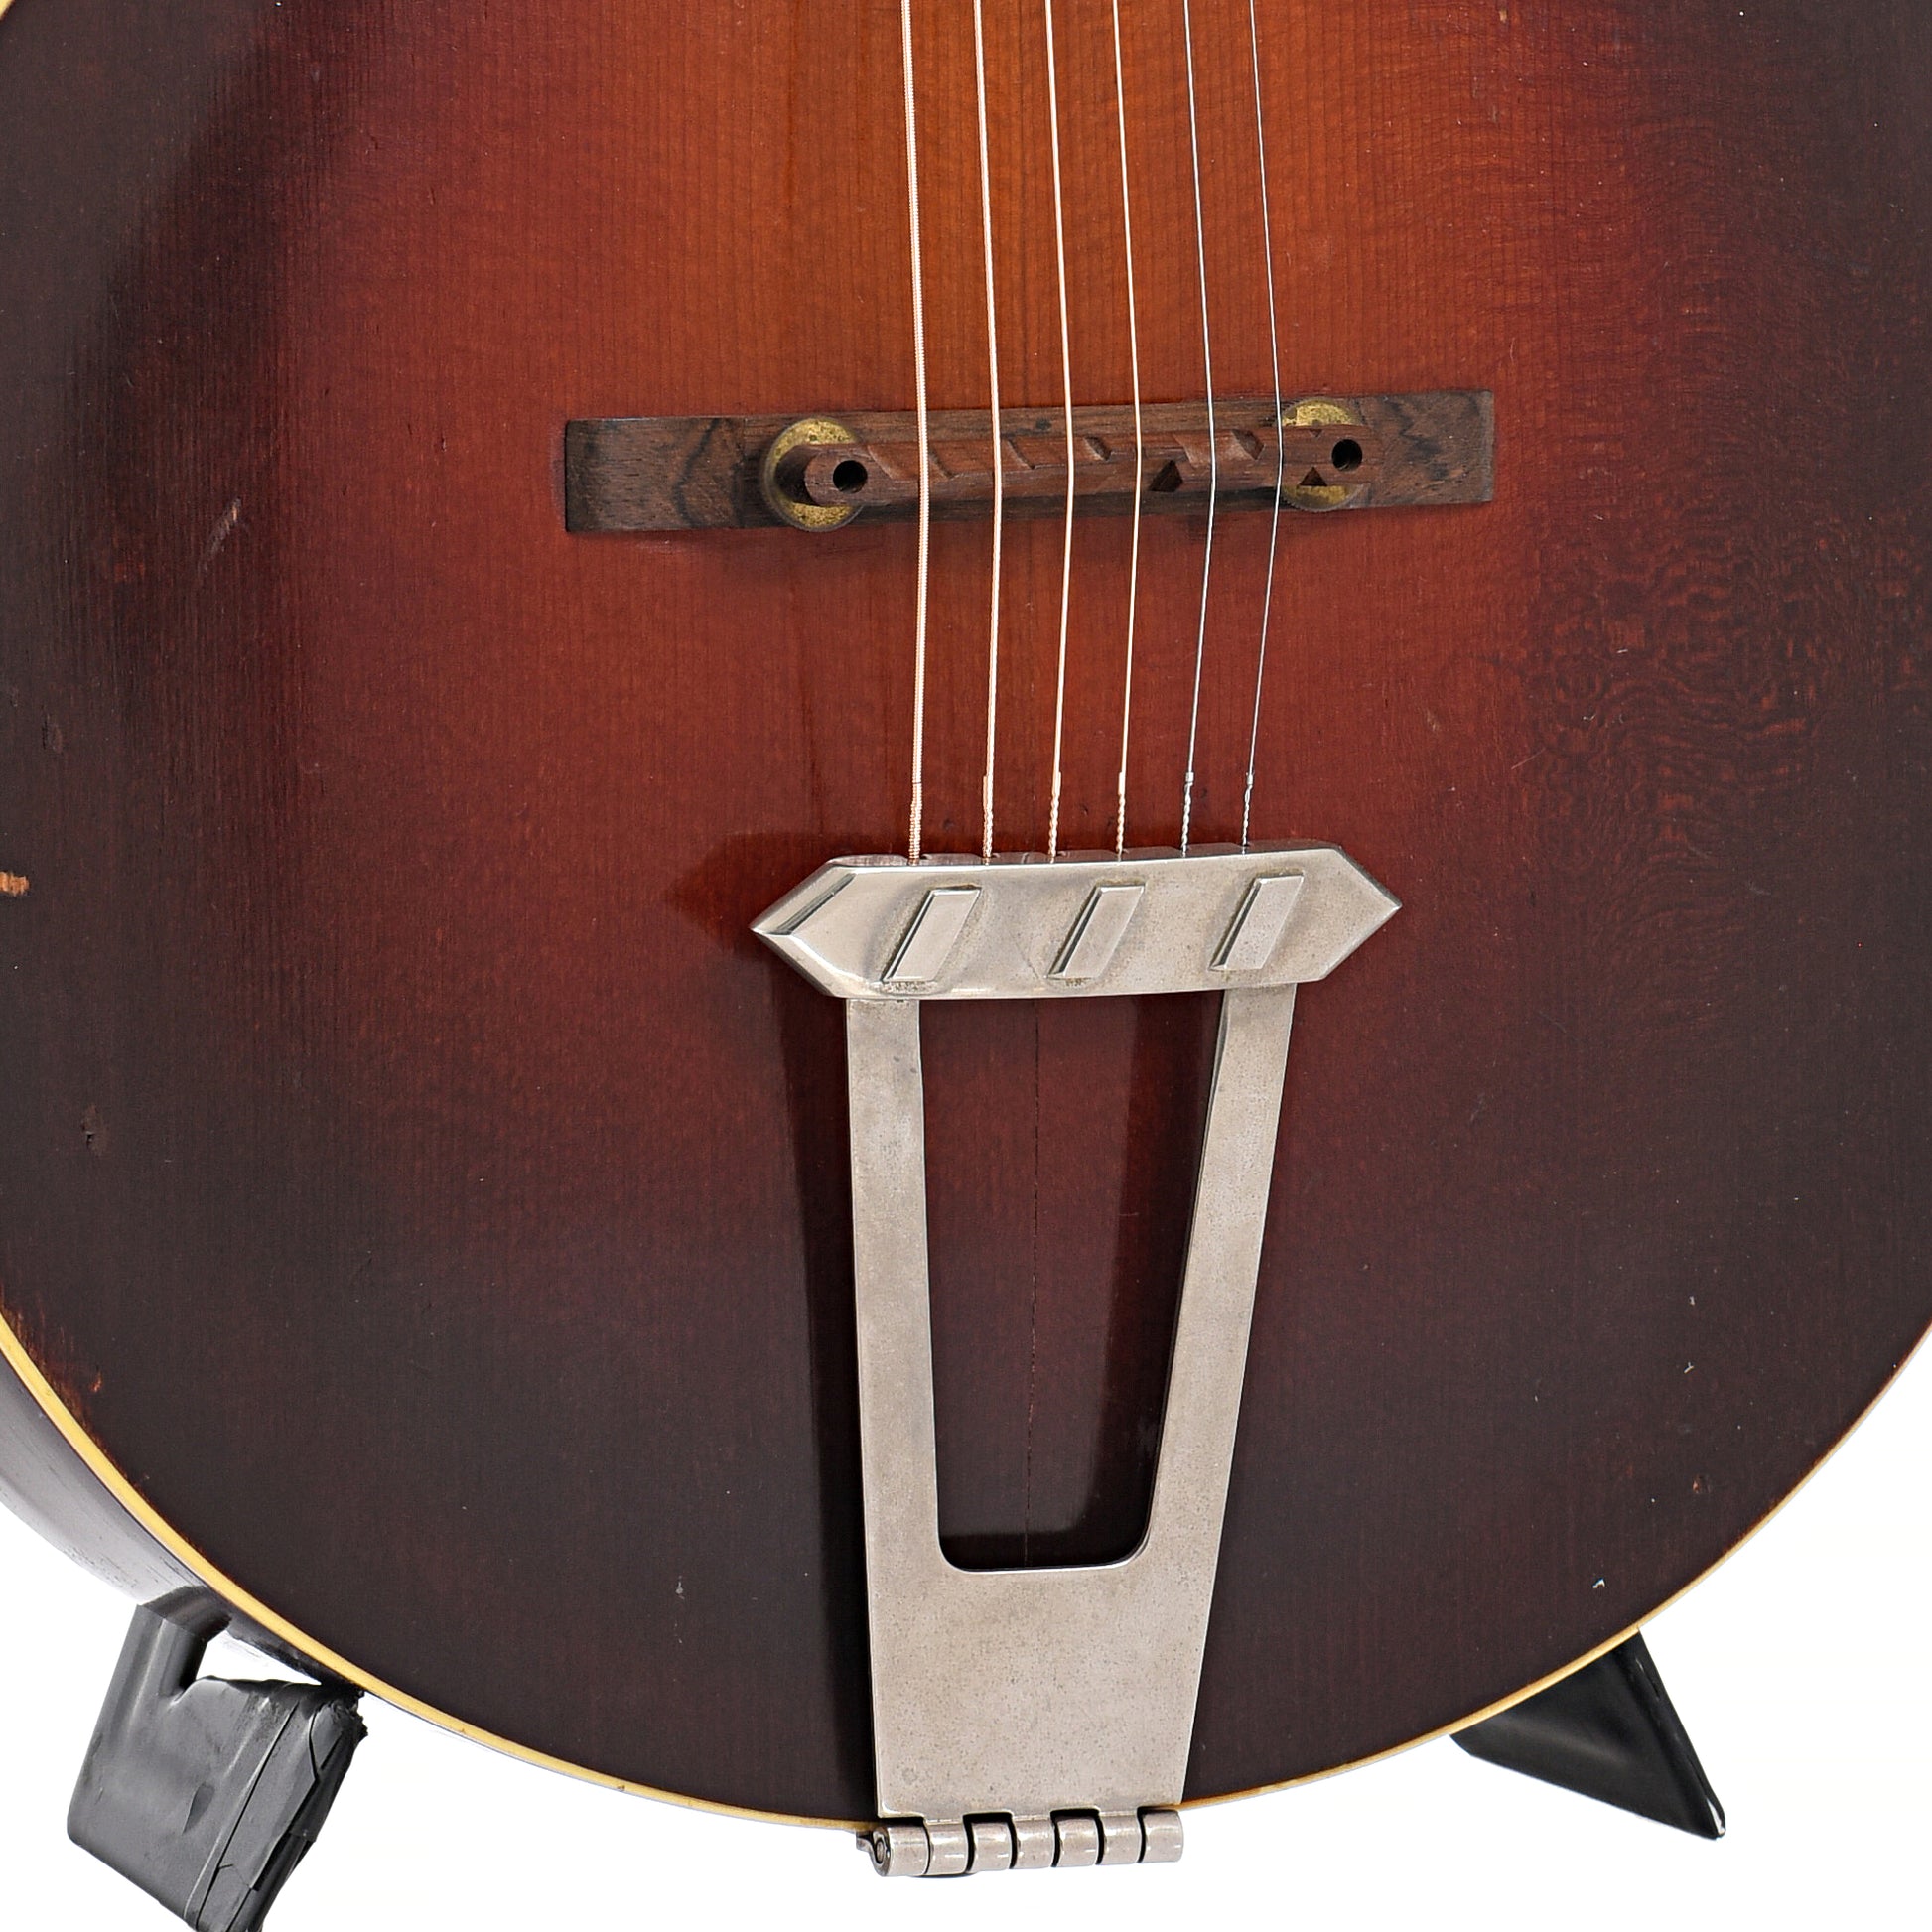 Tailpiece and bridge of Gibson L-3